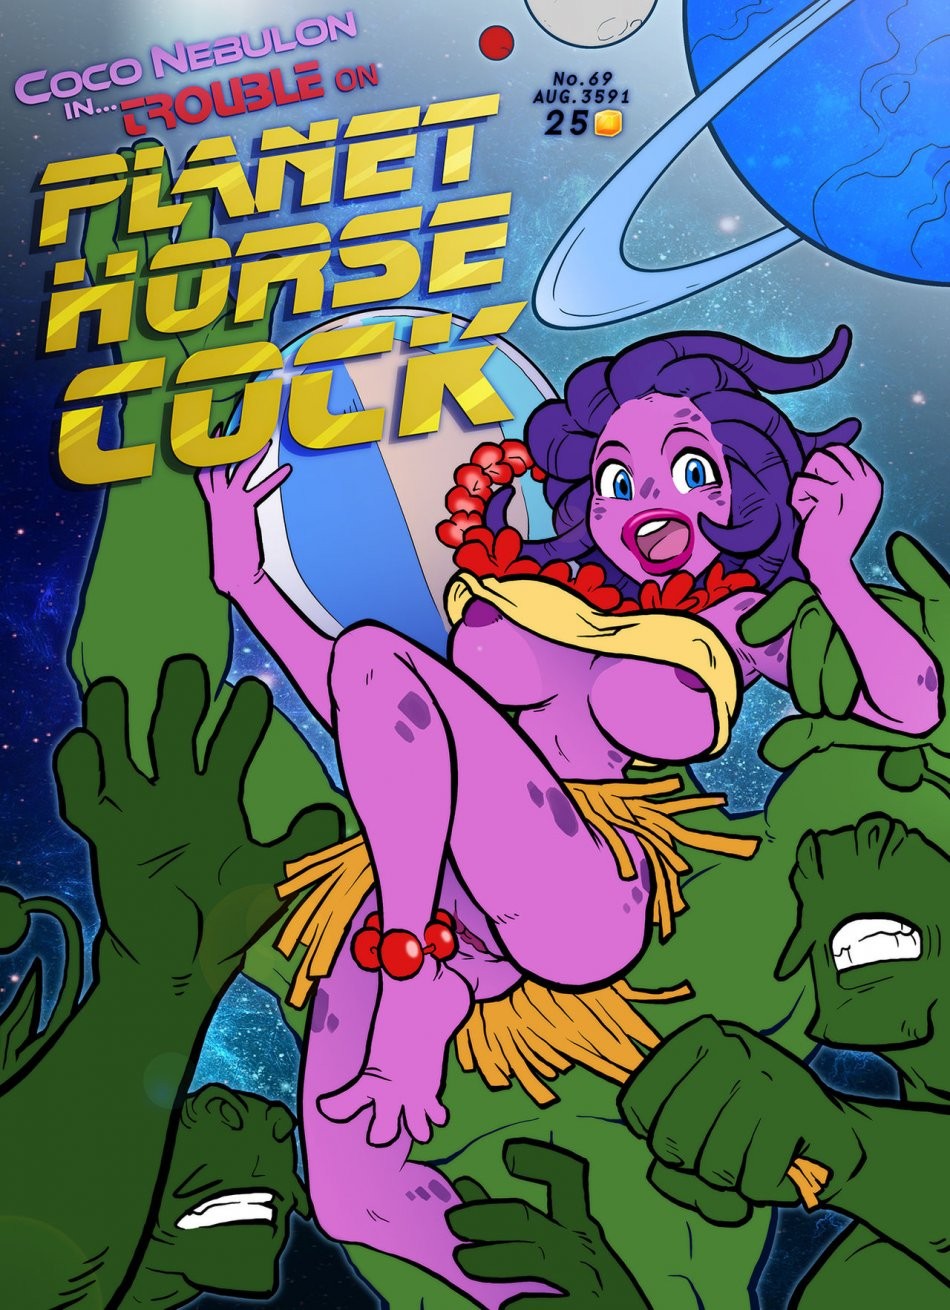 Coco Nebulon in … Trouble On Planet Horse Cock